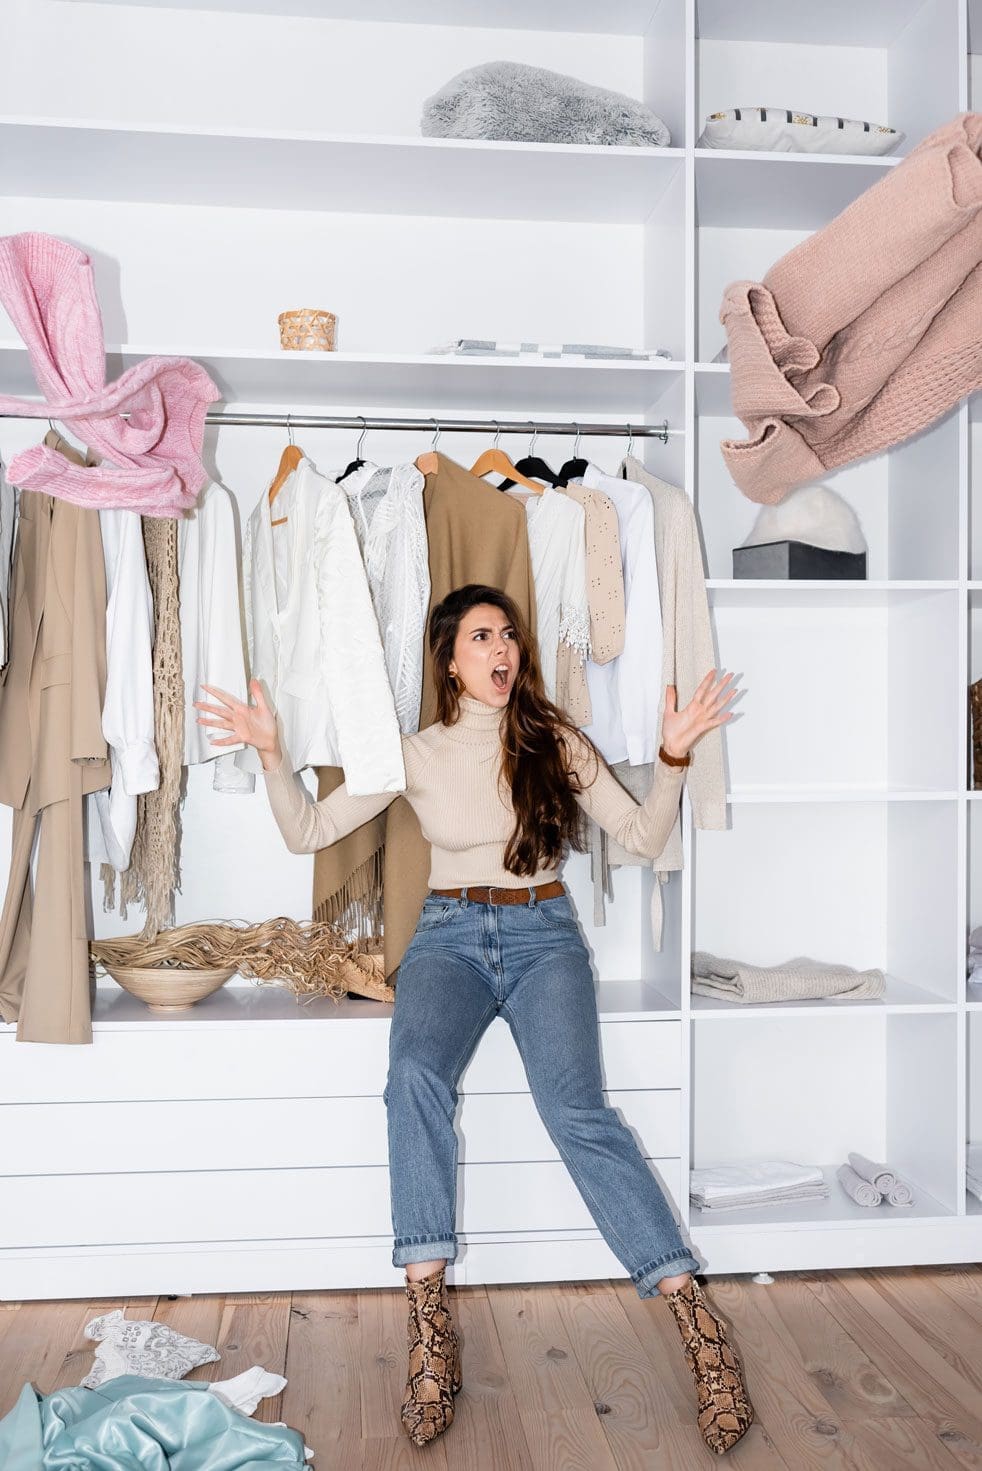 7 Insider Tips by Online Shopping Experts to Buy Clothes That Fit